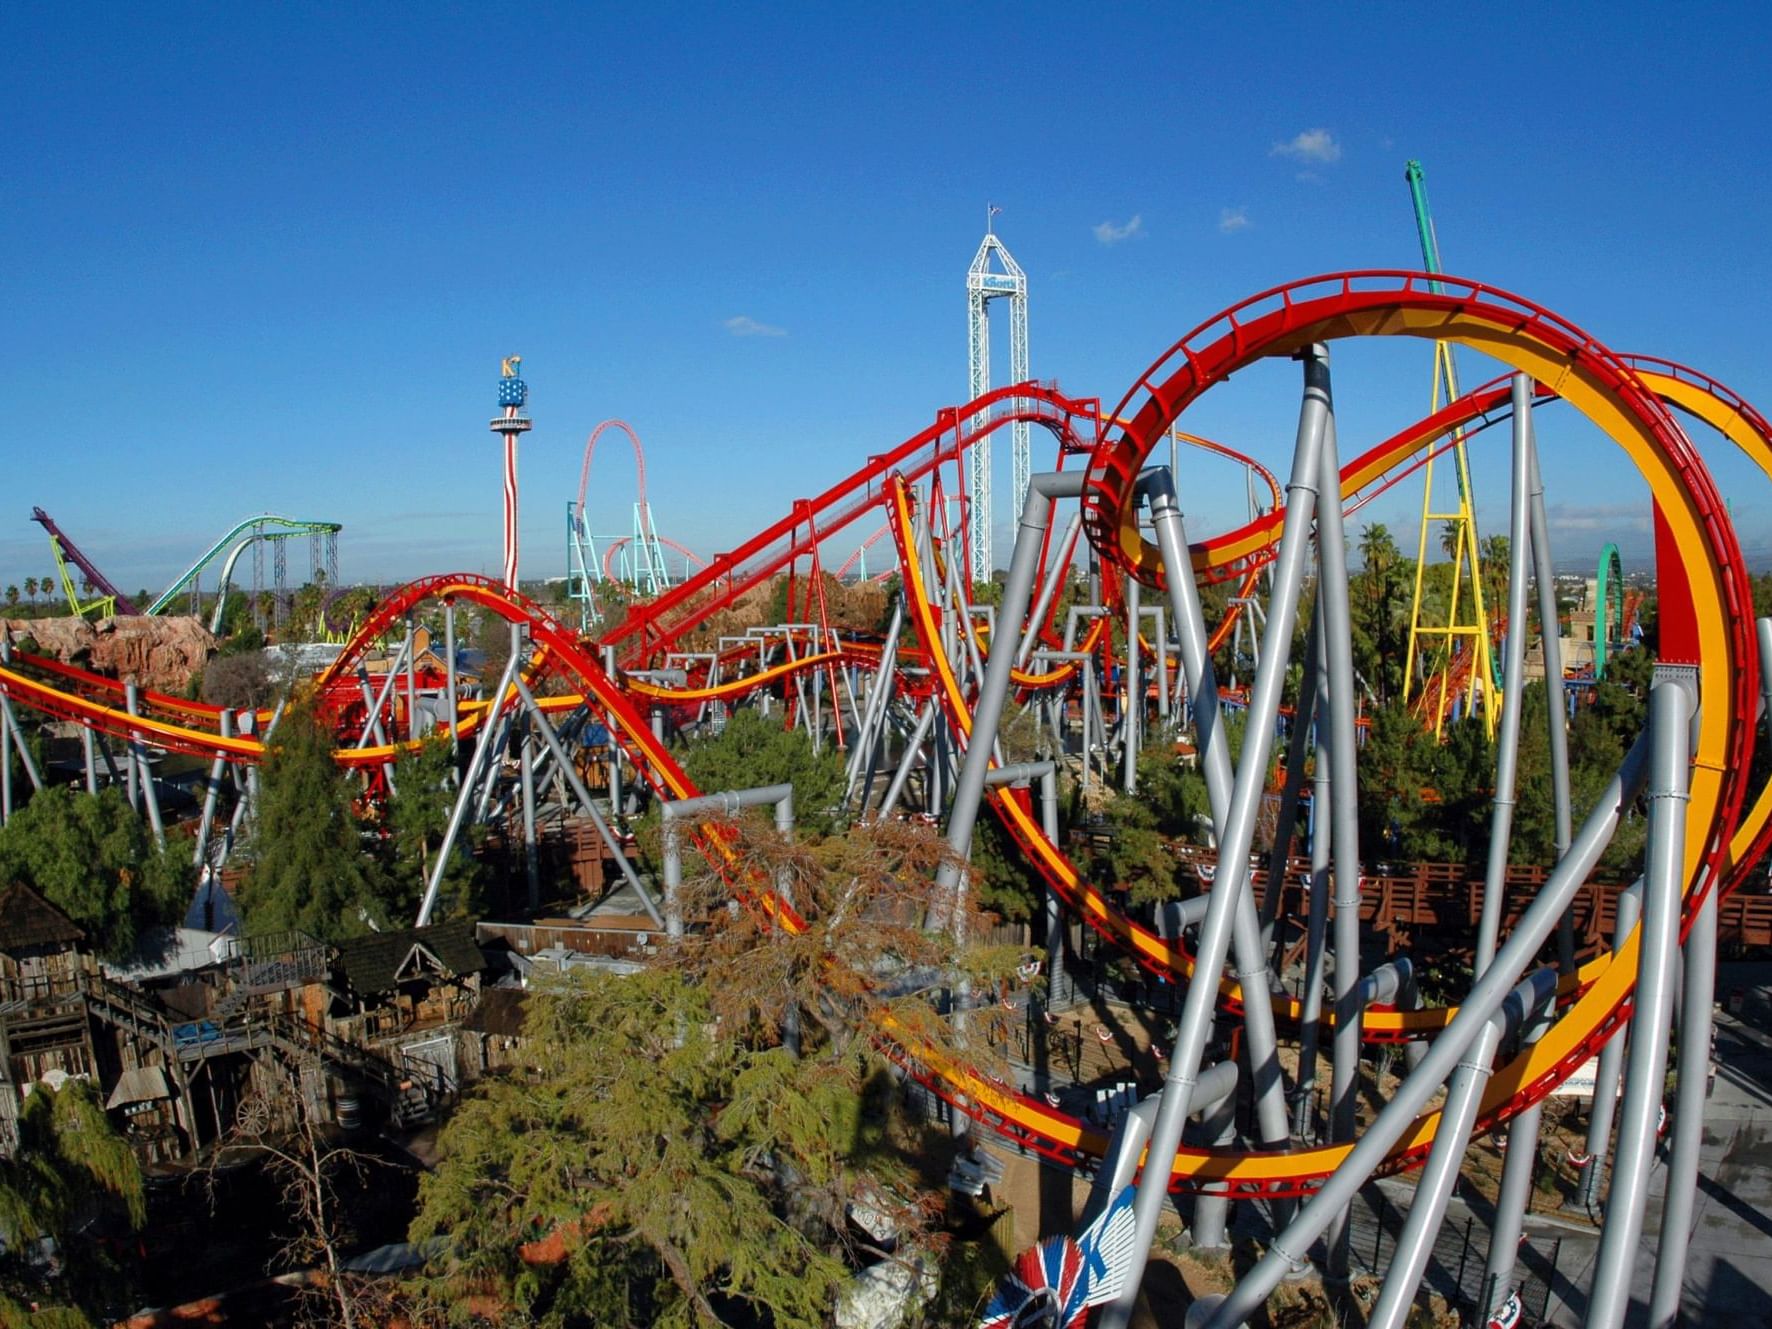 Exterior view of the Rollercoaster at Knott’s Berry Farm